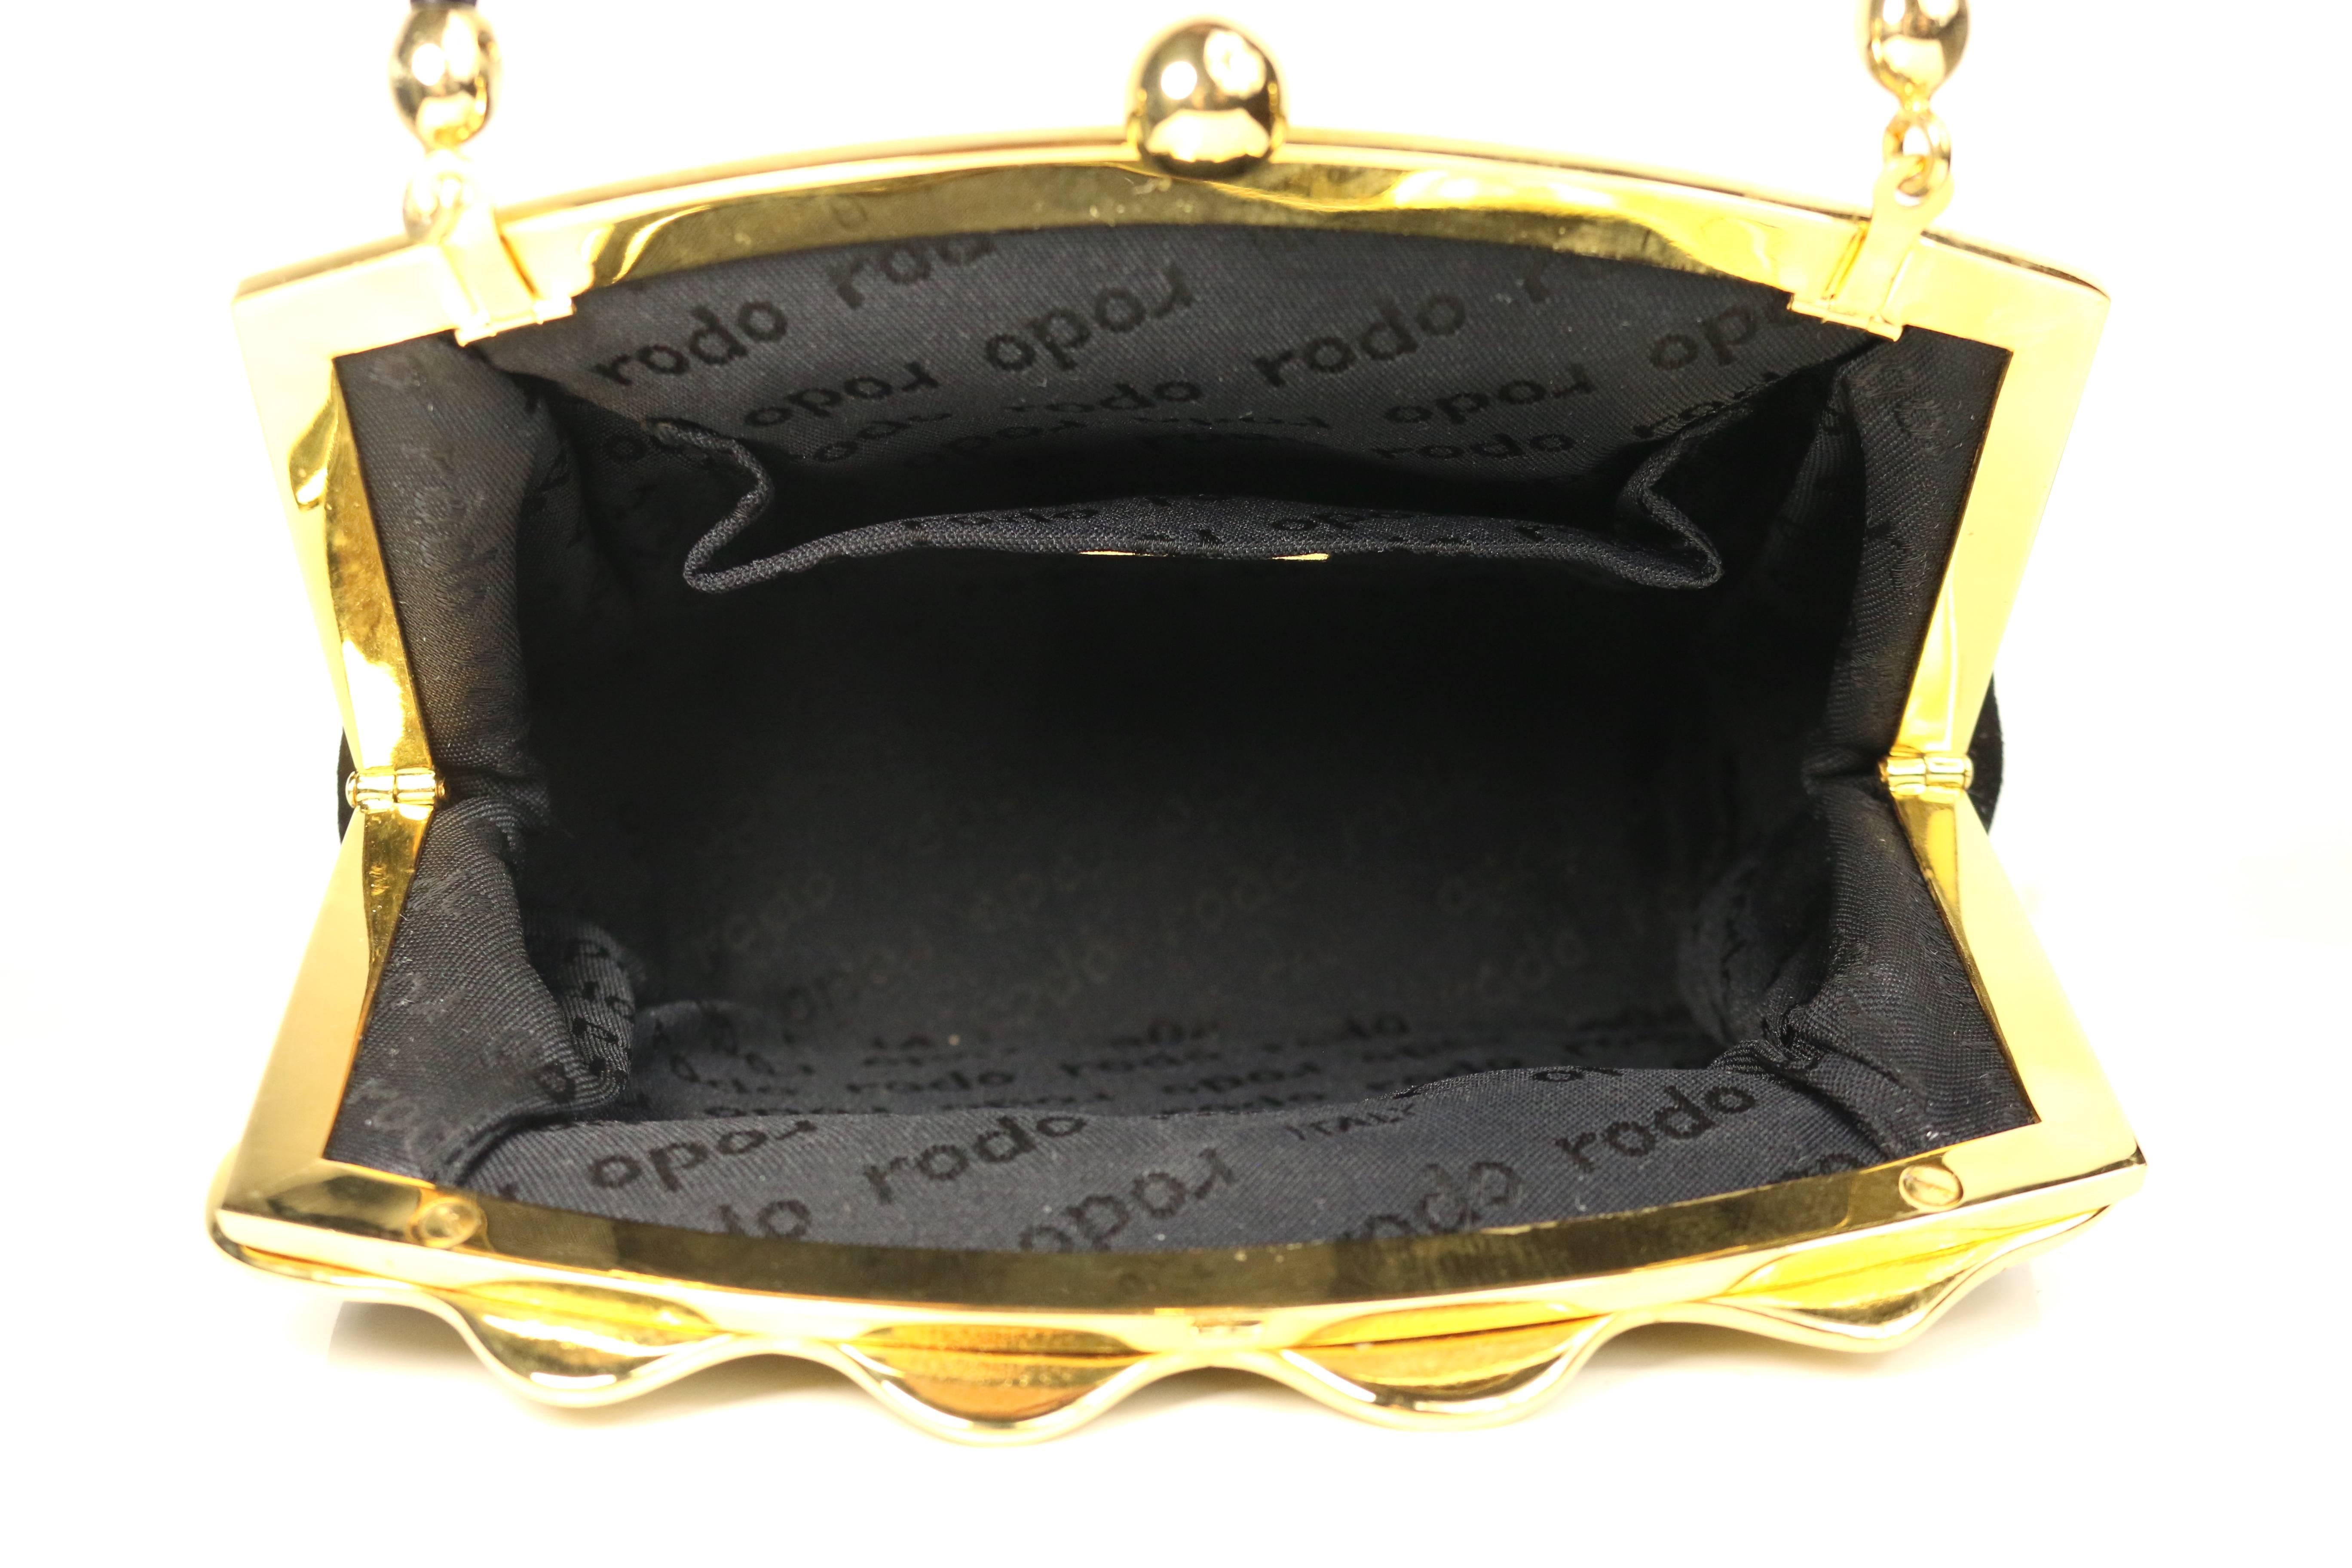 Rodo Black Suede Gold Toned Rhinestones Evening Clutch Shoulder Bag In Excellent Condition For Sale In Sheung Wan, HK